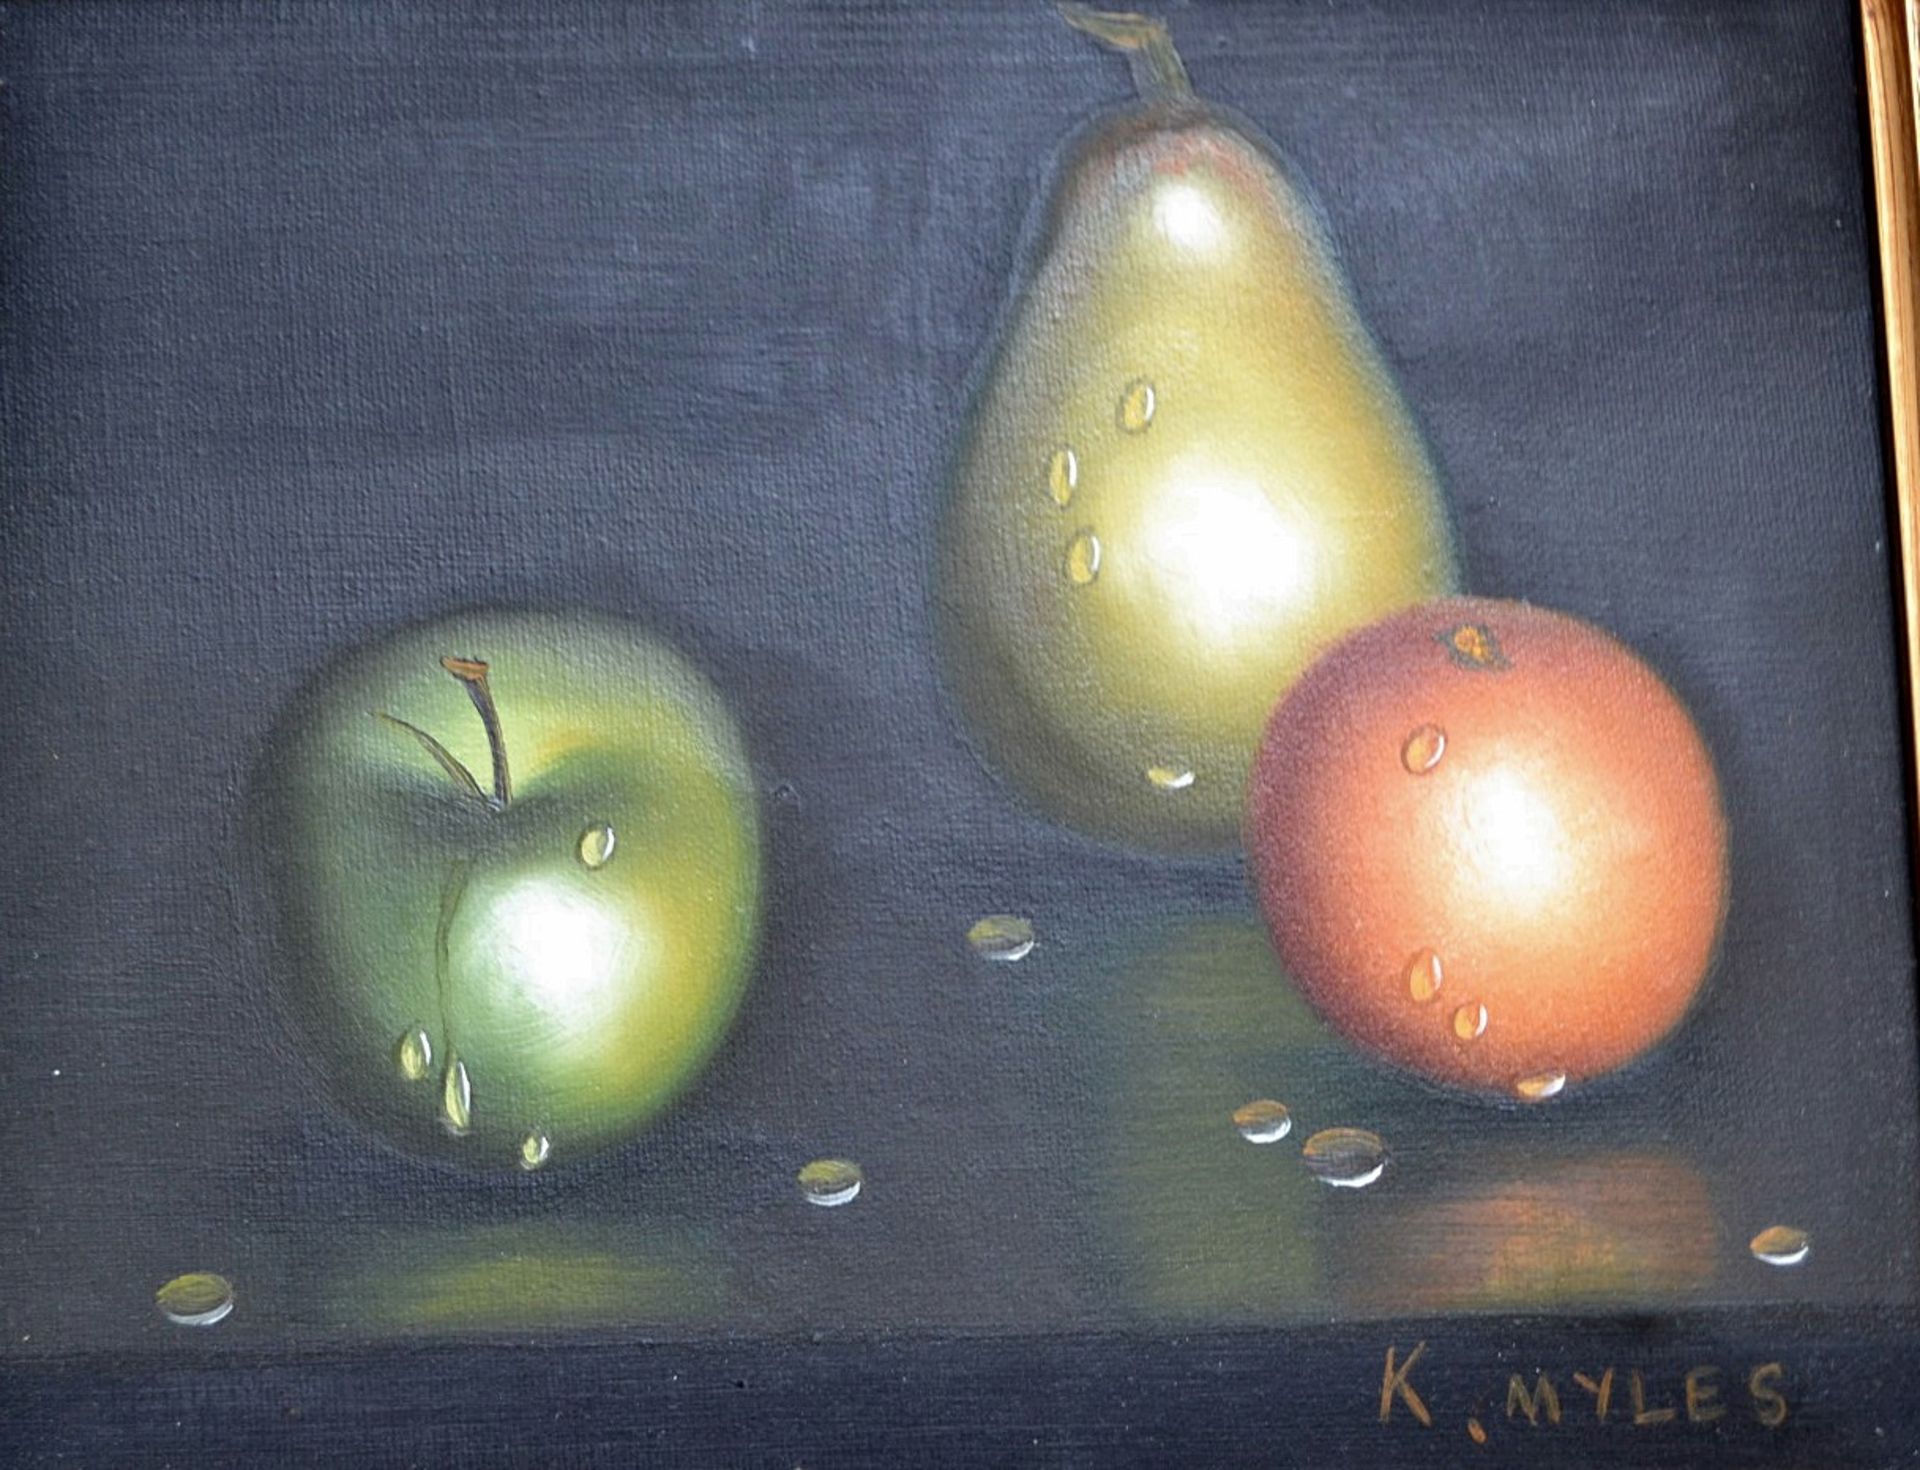 1 x Original Oil On Canvas Painting By K Myles - From A Grade II Listed Hall In Good Condition - - Image 2 of 4